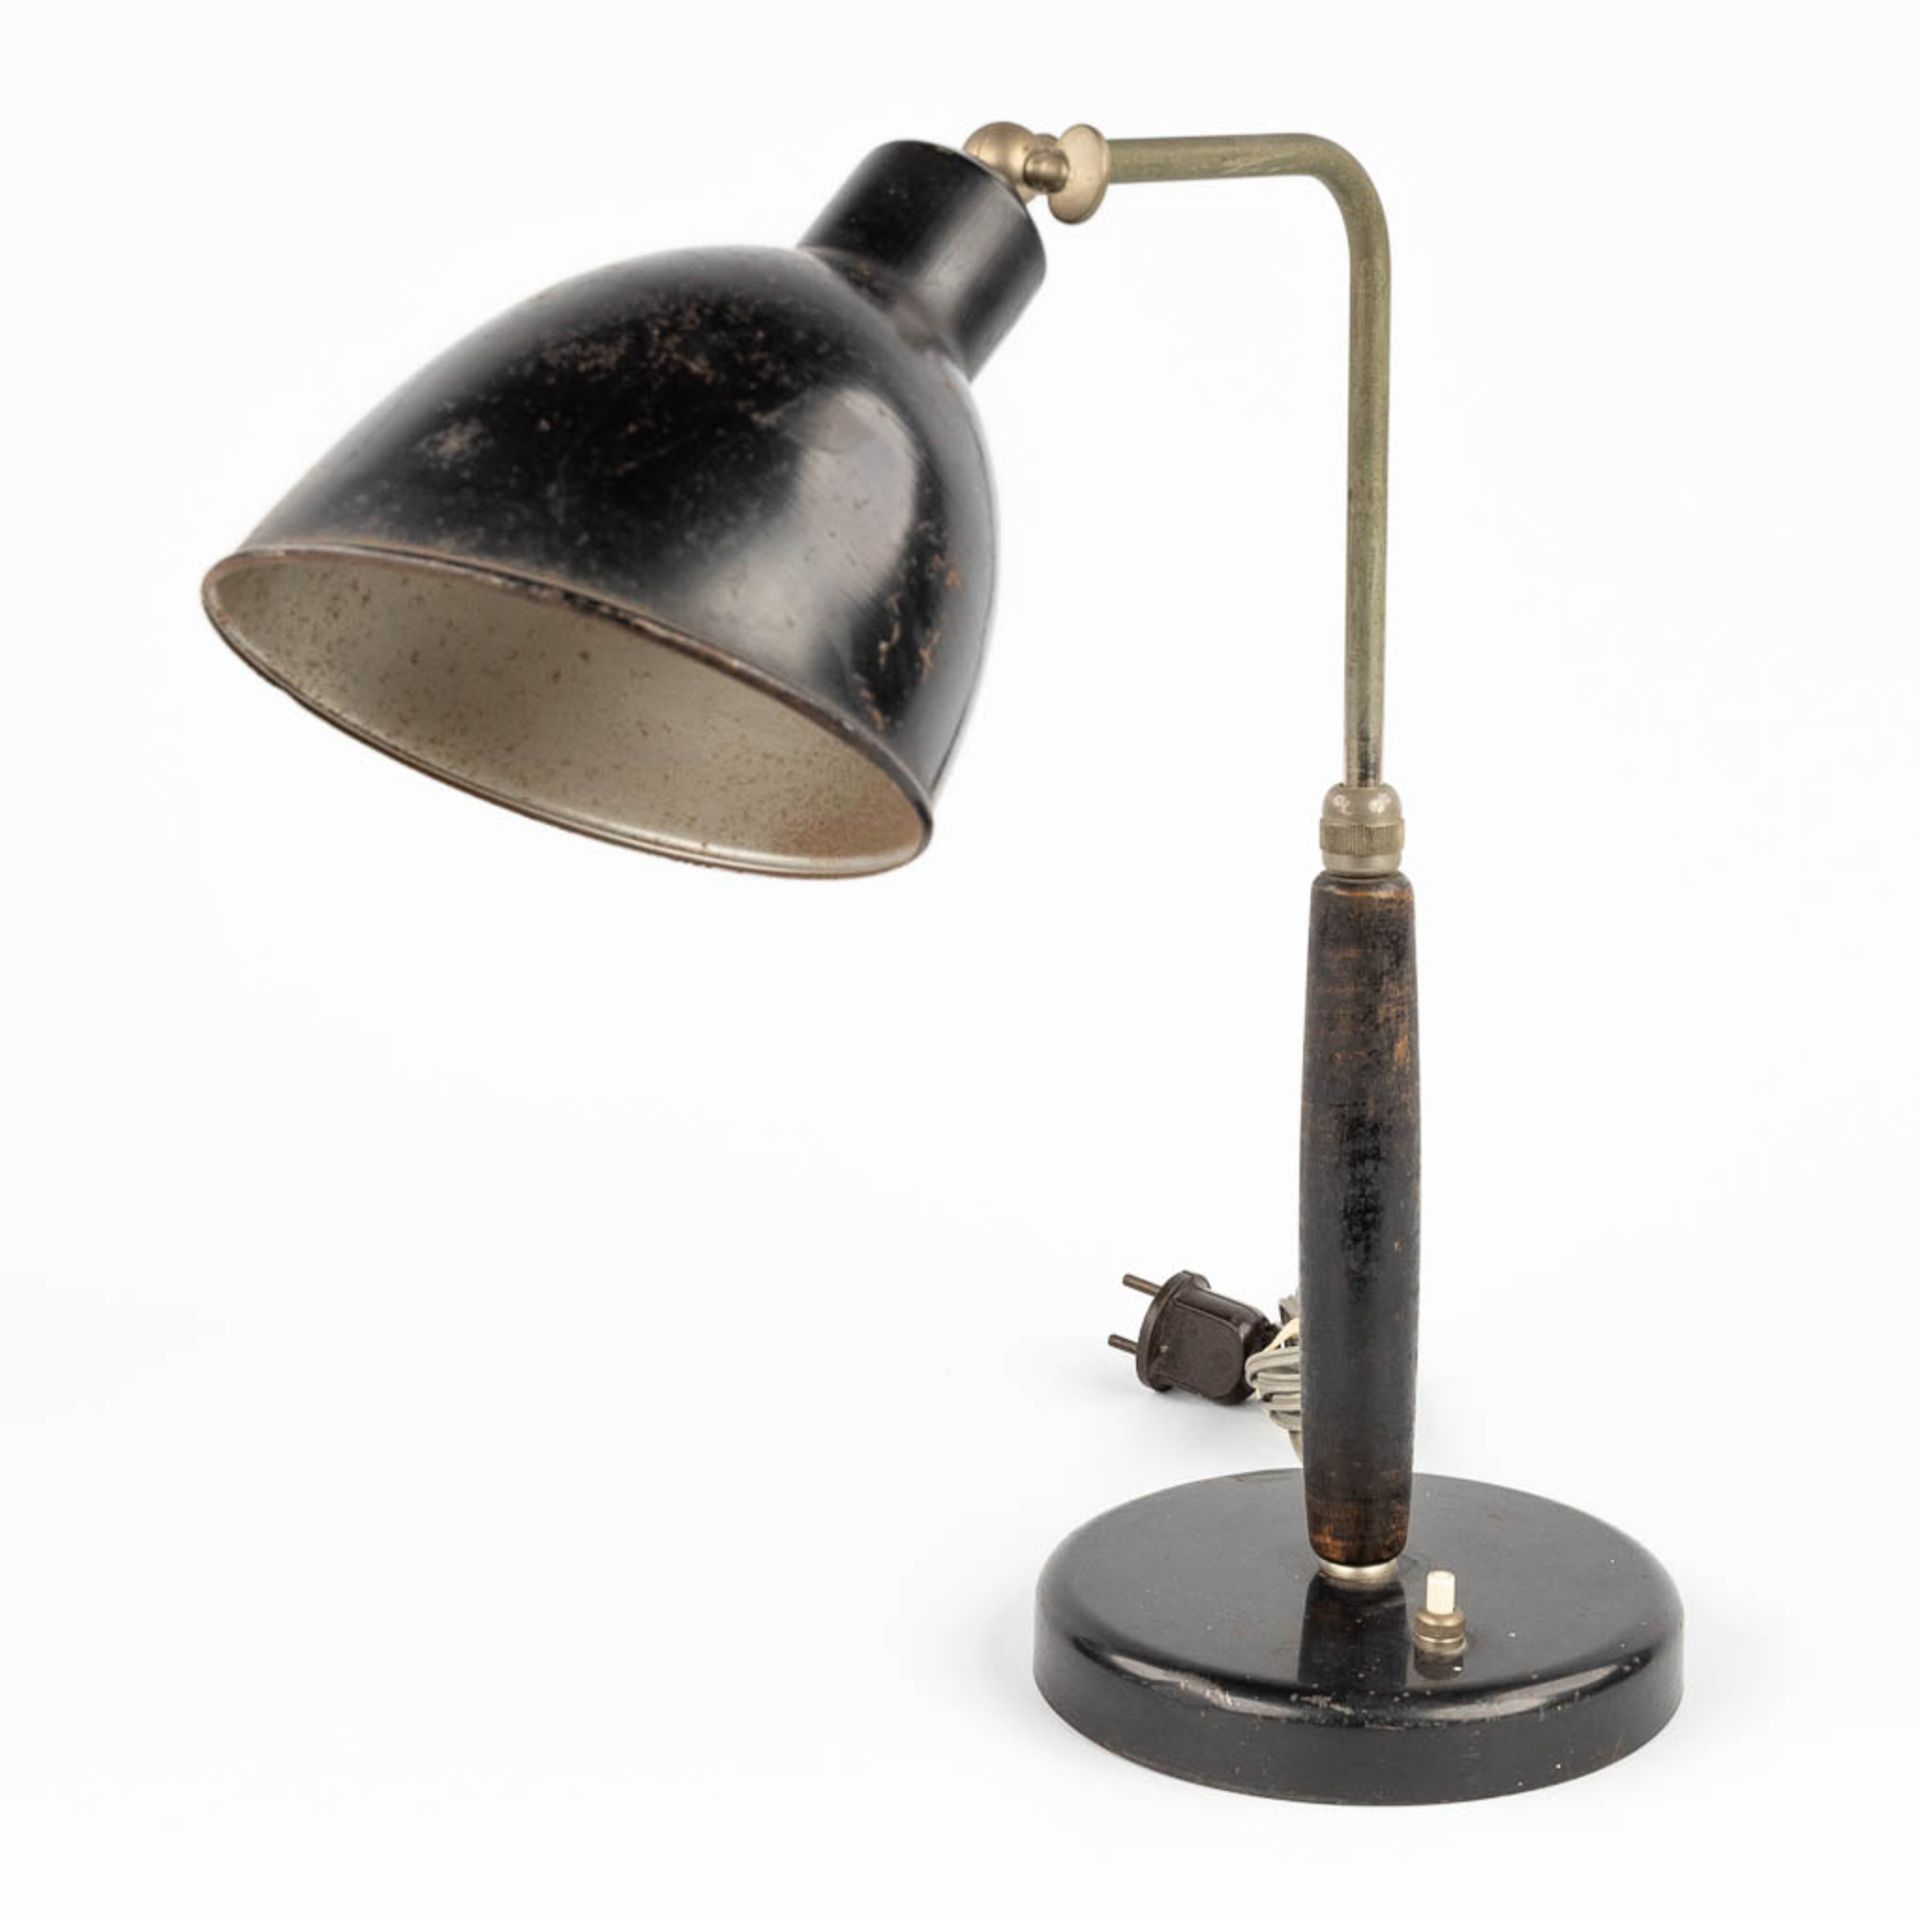 Christian DELL (1893-1974) 'Table lamp' made of metal and wood. (H:37 x D:16 cm)